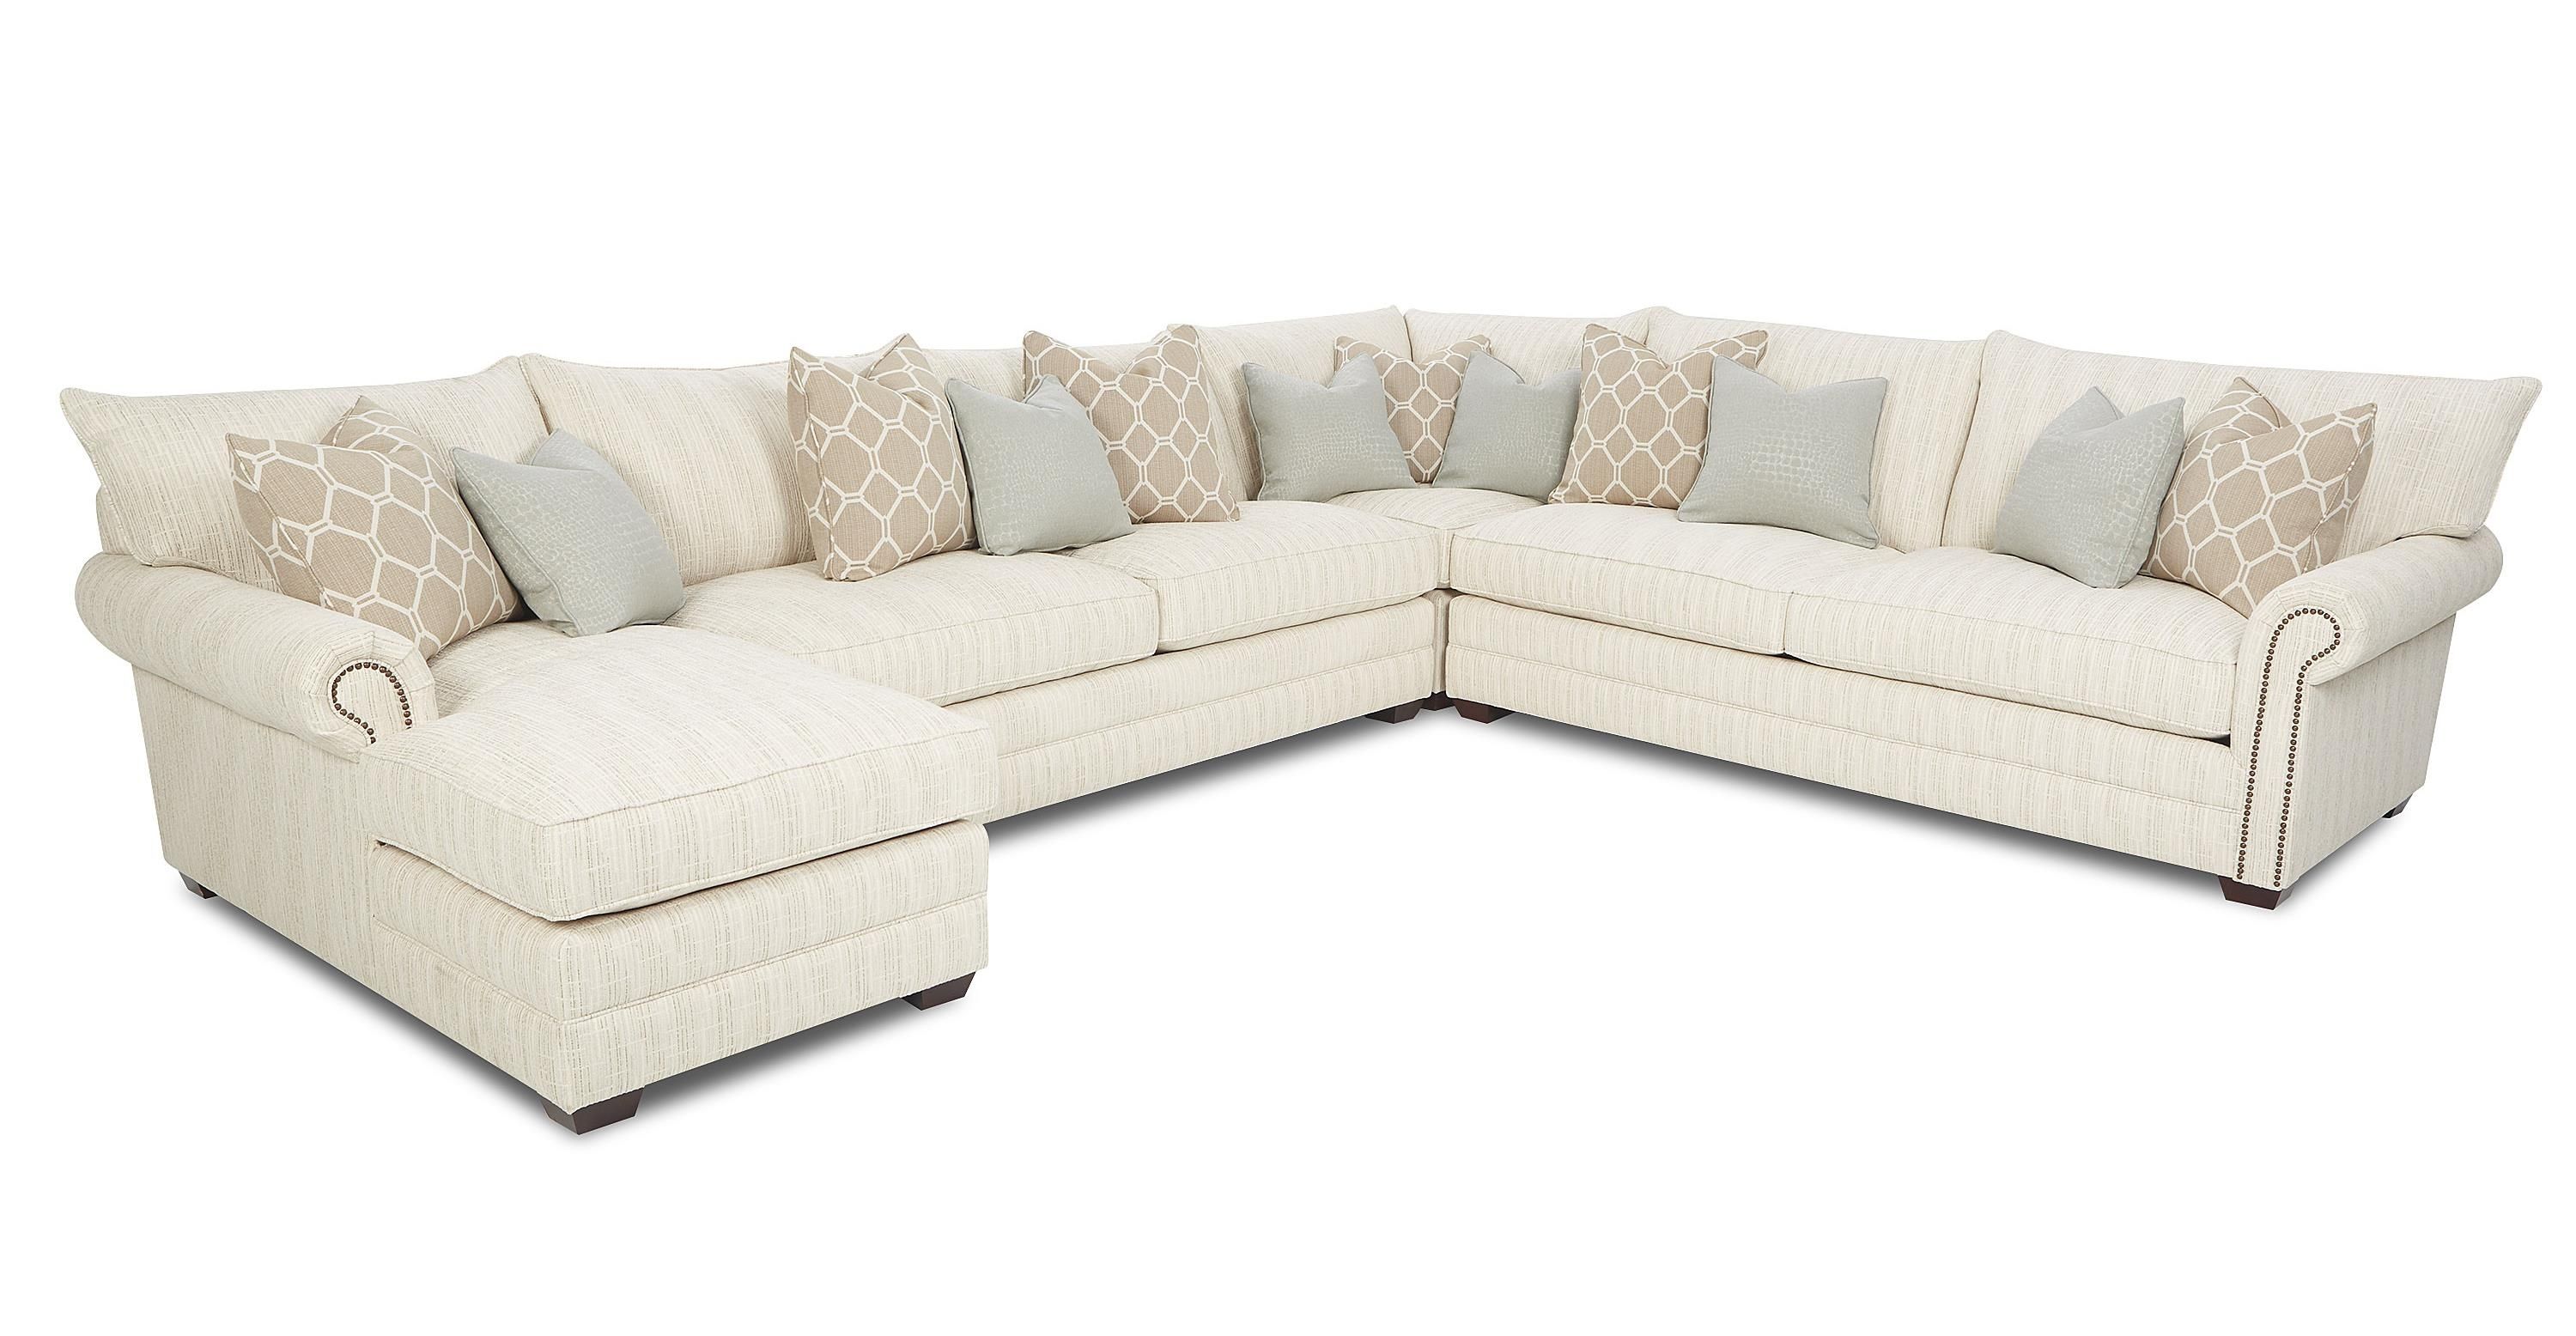 Traditional Sectional Sofa With Nailhead Trim And Chaise Lounge Inside Sectional Sofas With Nailhead Trim (Photo 1 of 10)